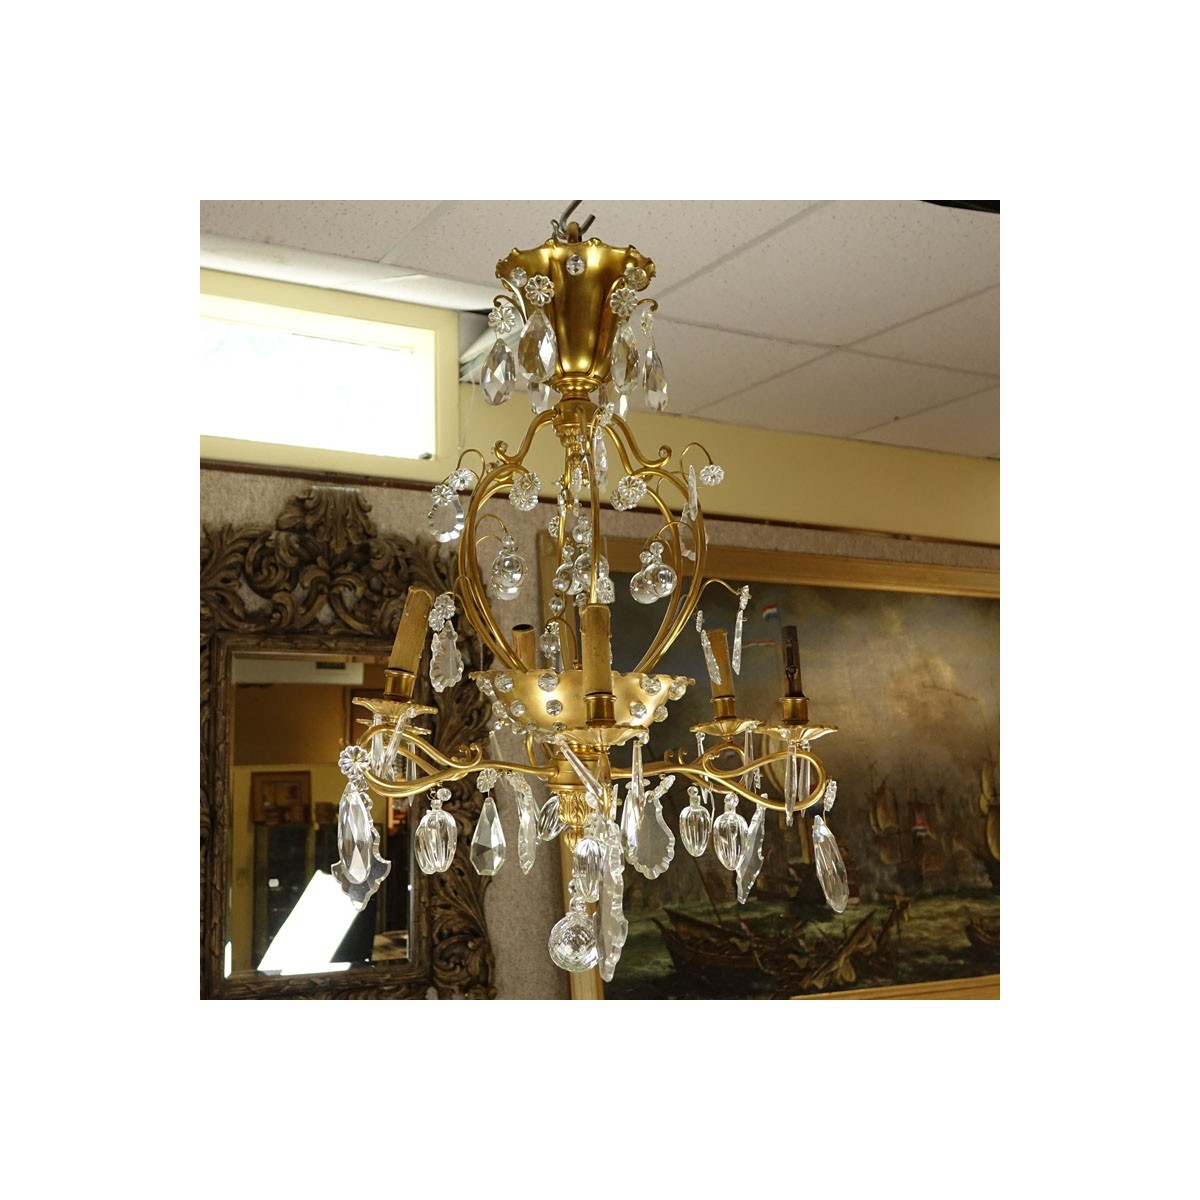 Late 19th/Early 20th Century Rococo Style Gilt Bronze and Crystal 6-Arm Chandelier. Decorated with